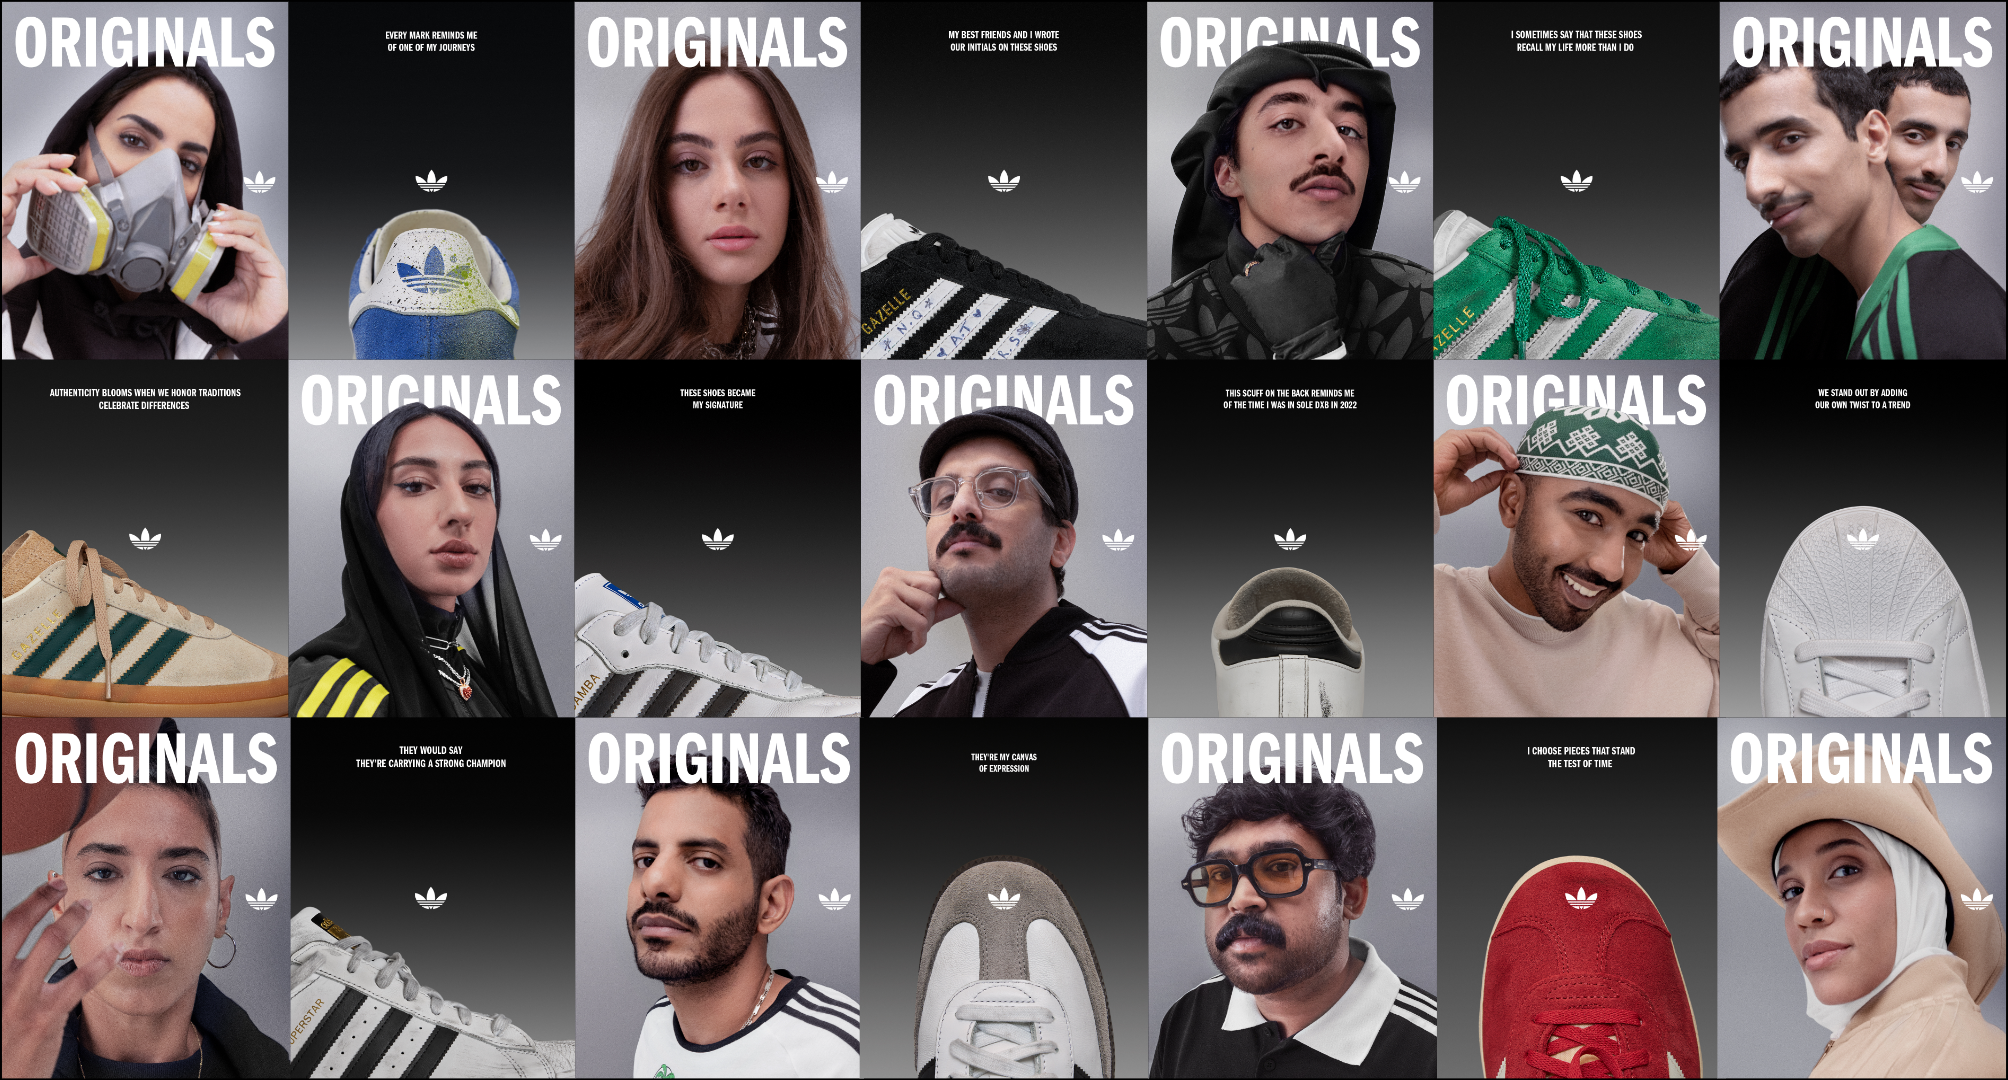 Tale of the Adidas Trefoil: How the Brand X VICE Adapted the Originals Campaign to the Middle East